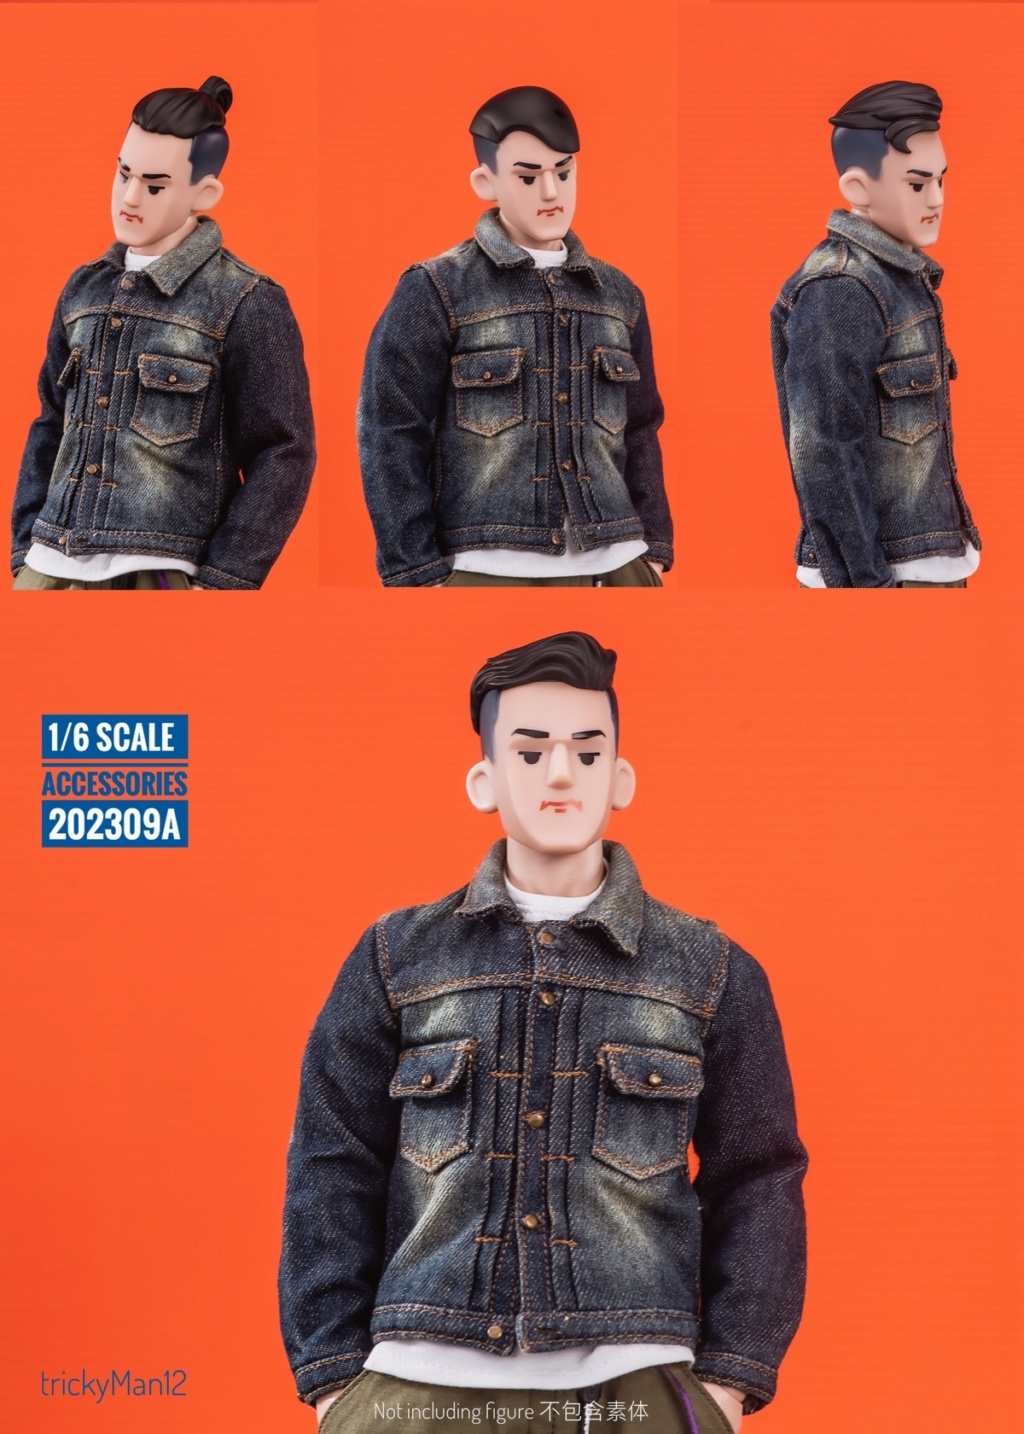 NEW PRODUCT: trickyMan12: 1/6 male doll head sculpture group 202309A（ black hair ）/202309W（ brown hair ） 11565410